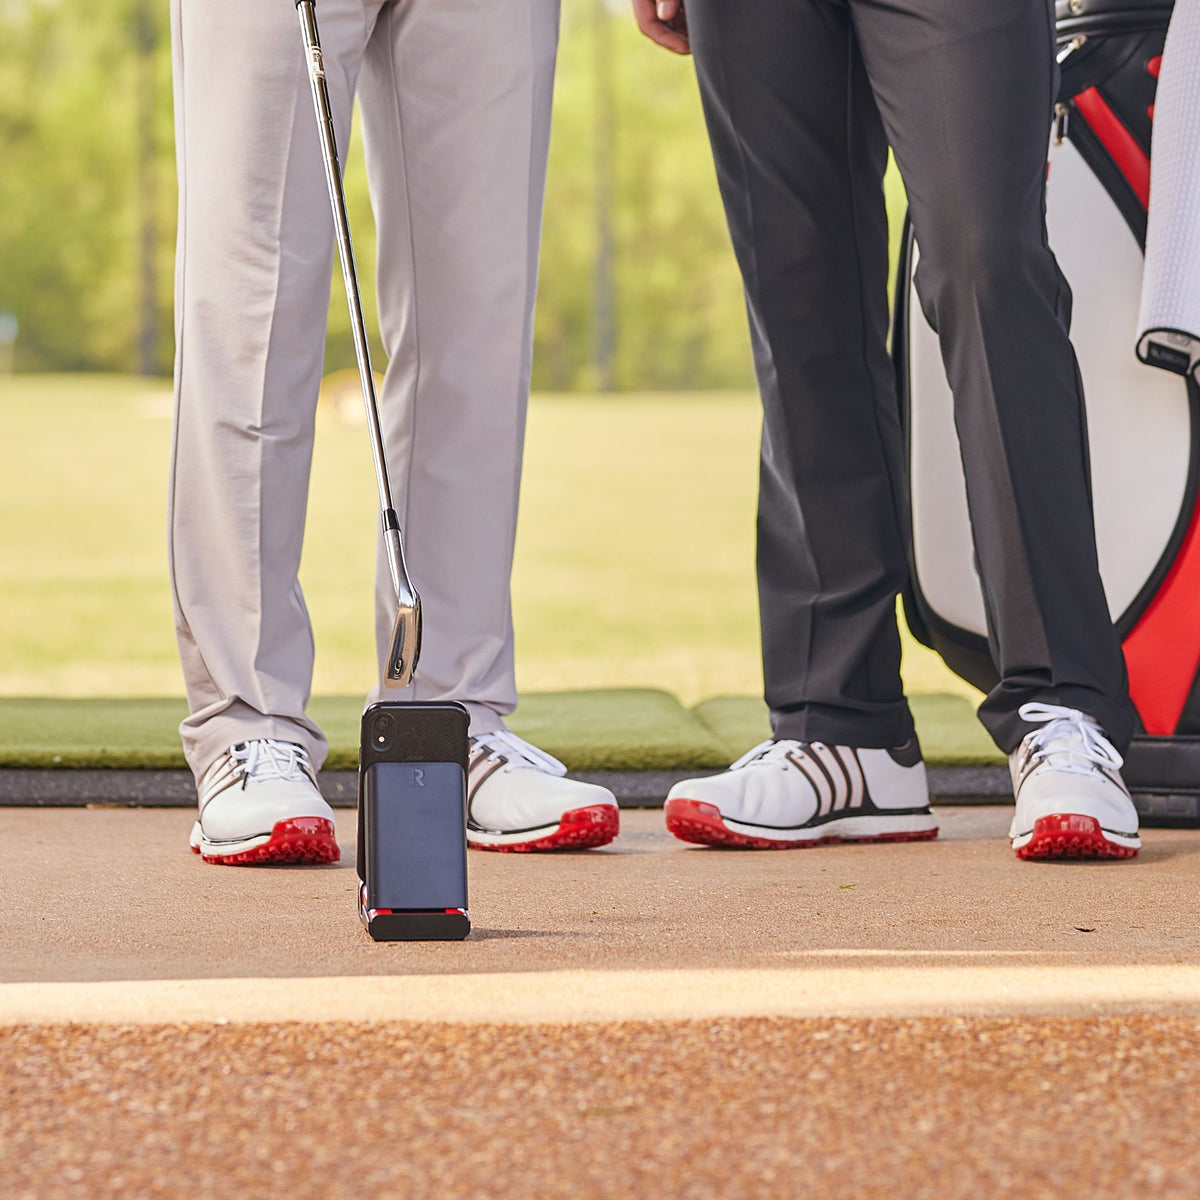 Rapsodo Mobile Launch Monitor with golfers on a driving range